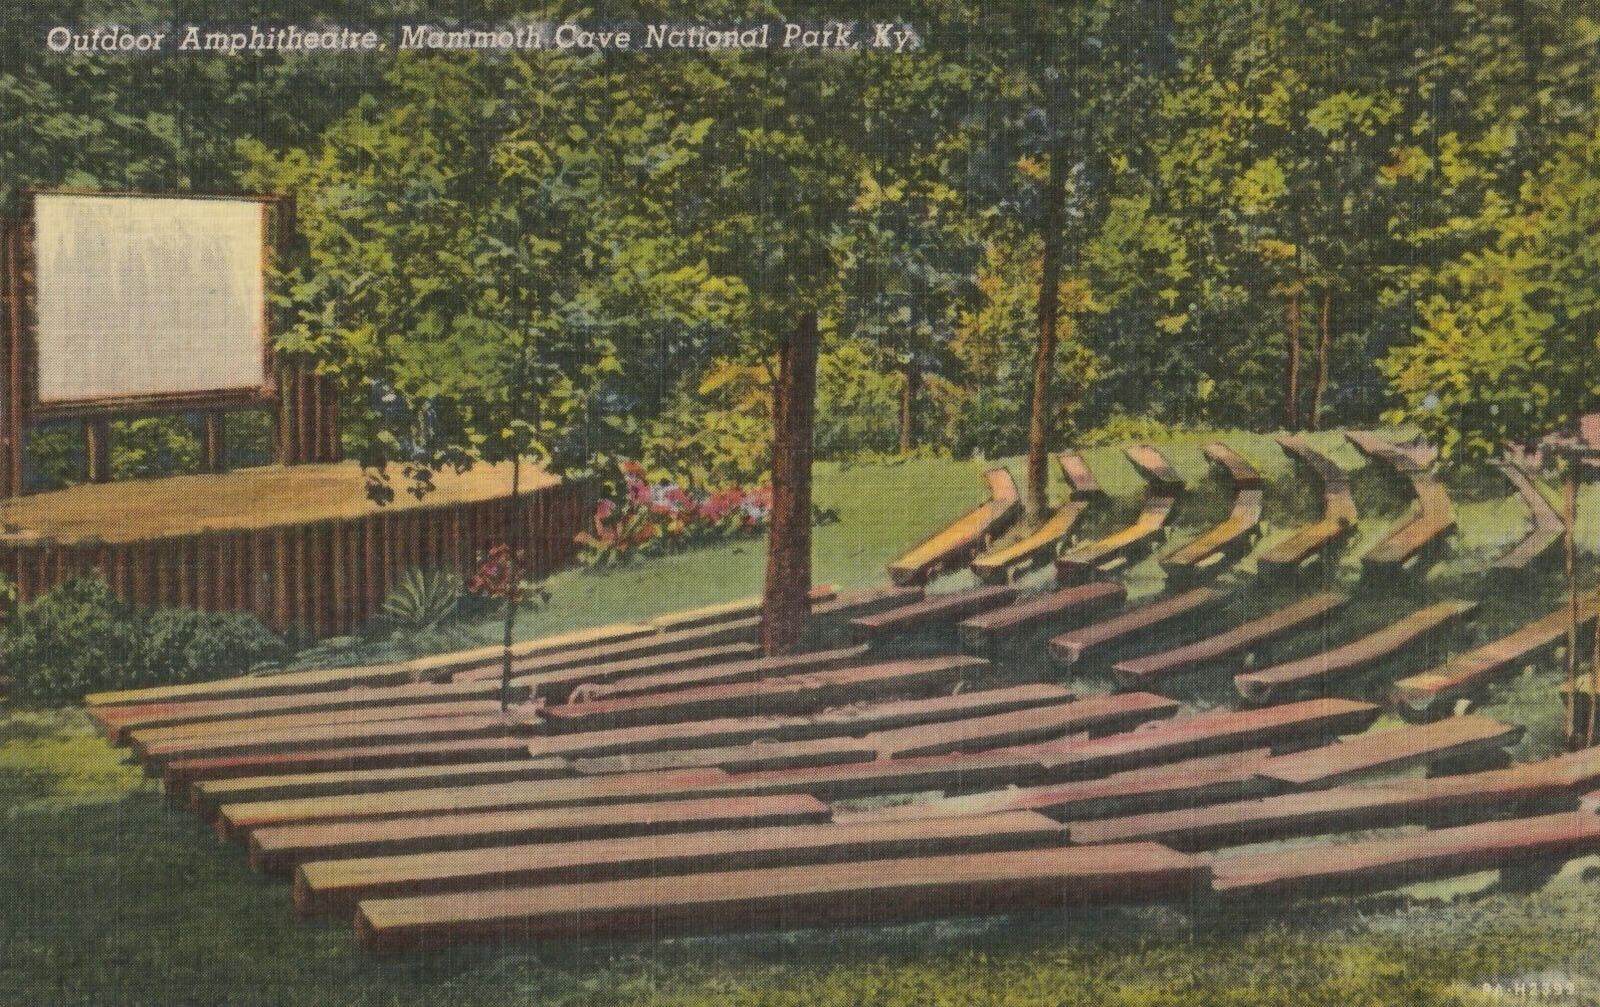 VINTAGE POSTCARD OUTDOOR AMPHITHEATRE AT MAMMOTH CAVE NATIONAL PARK, KY